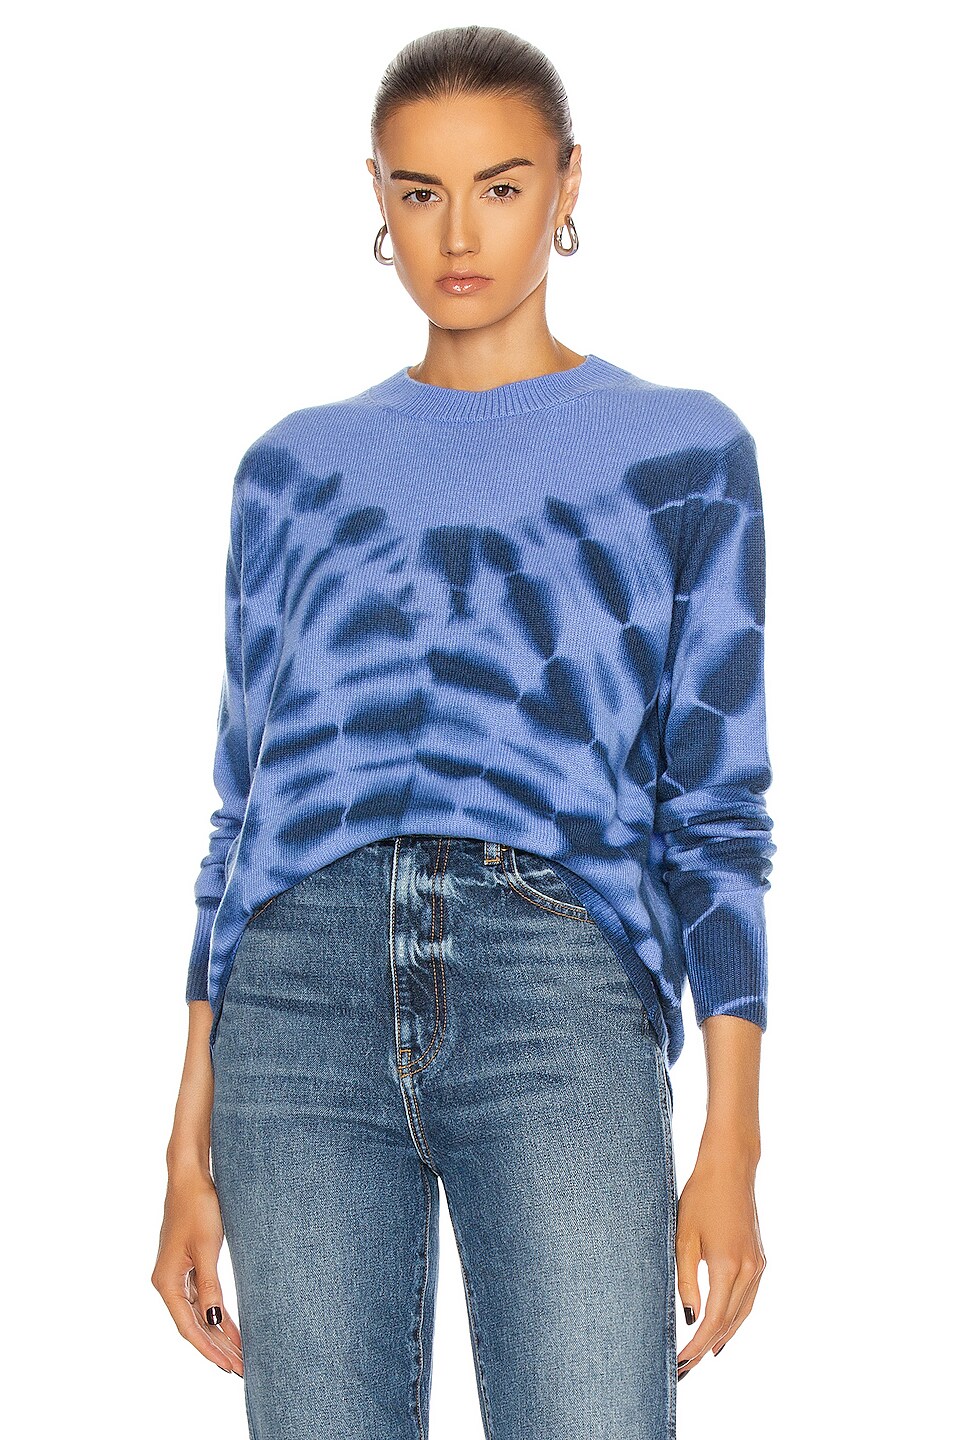 Image 1 of The Elder Statesman Ink Blot Tranquility Crew Sweater in Periwinkle & Navy